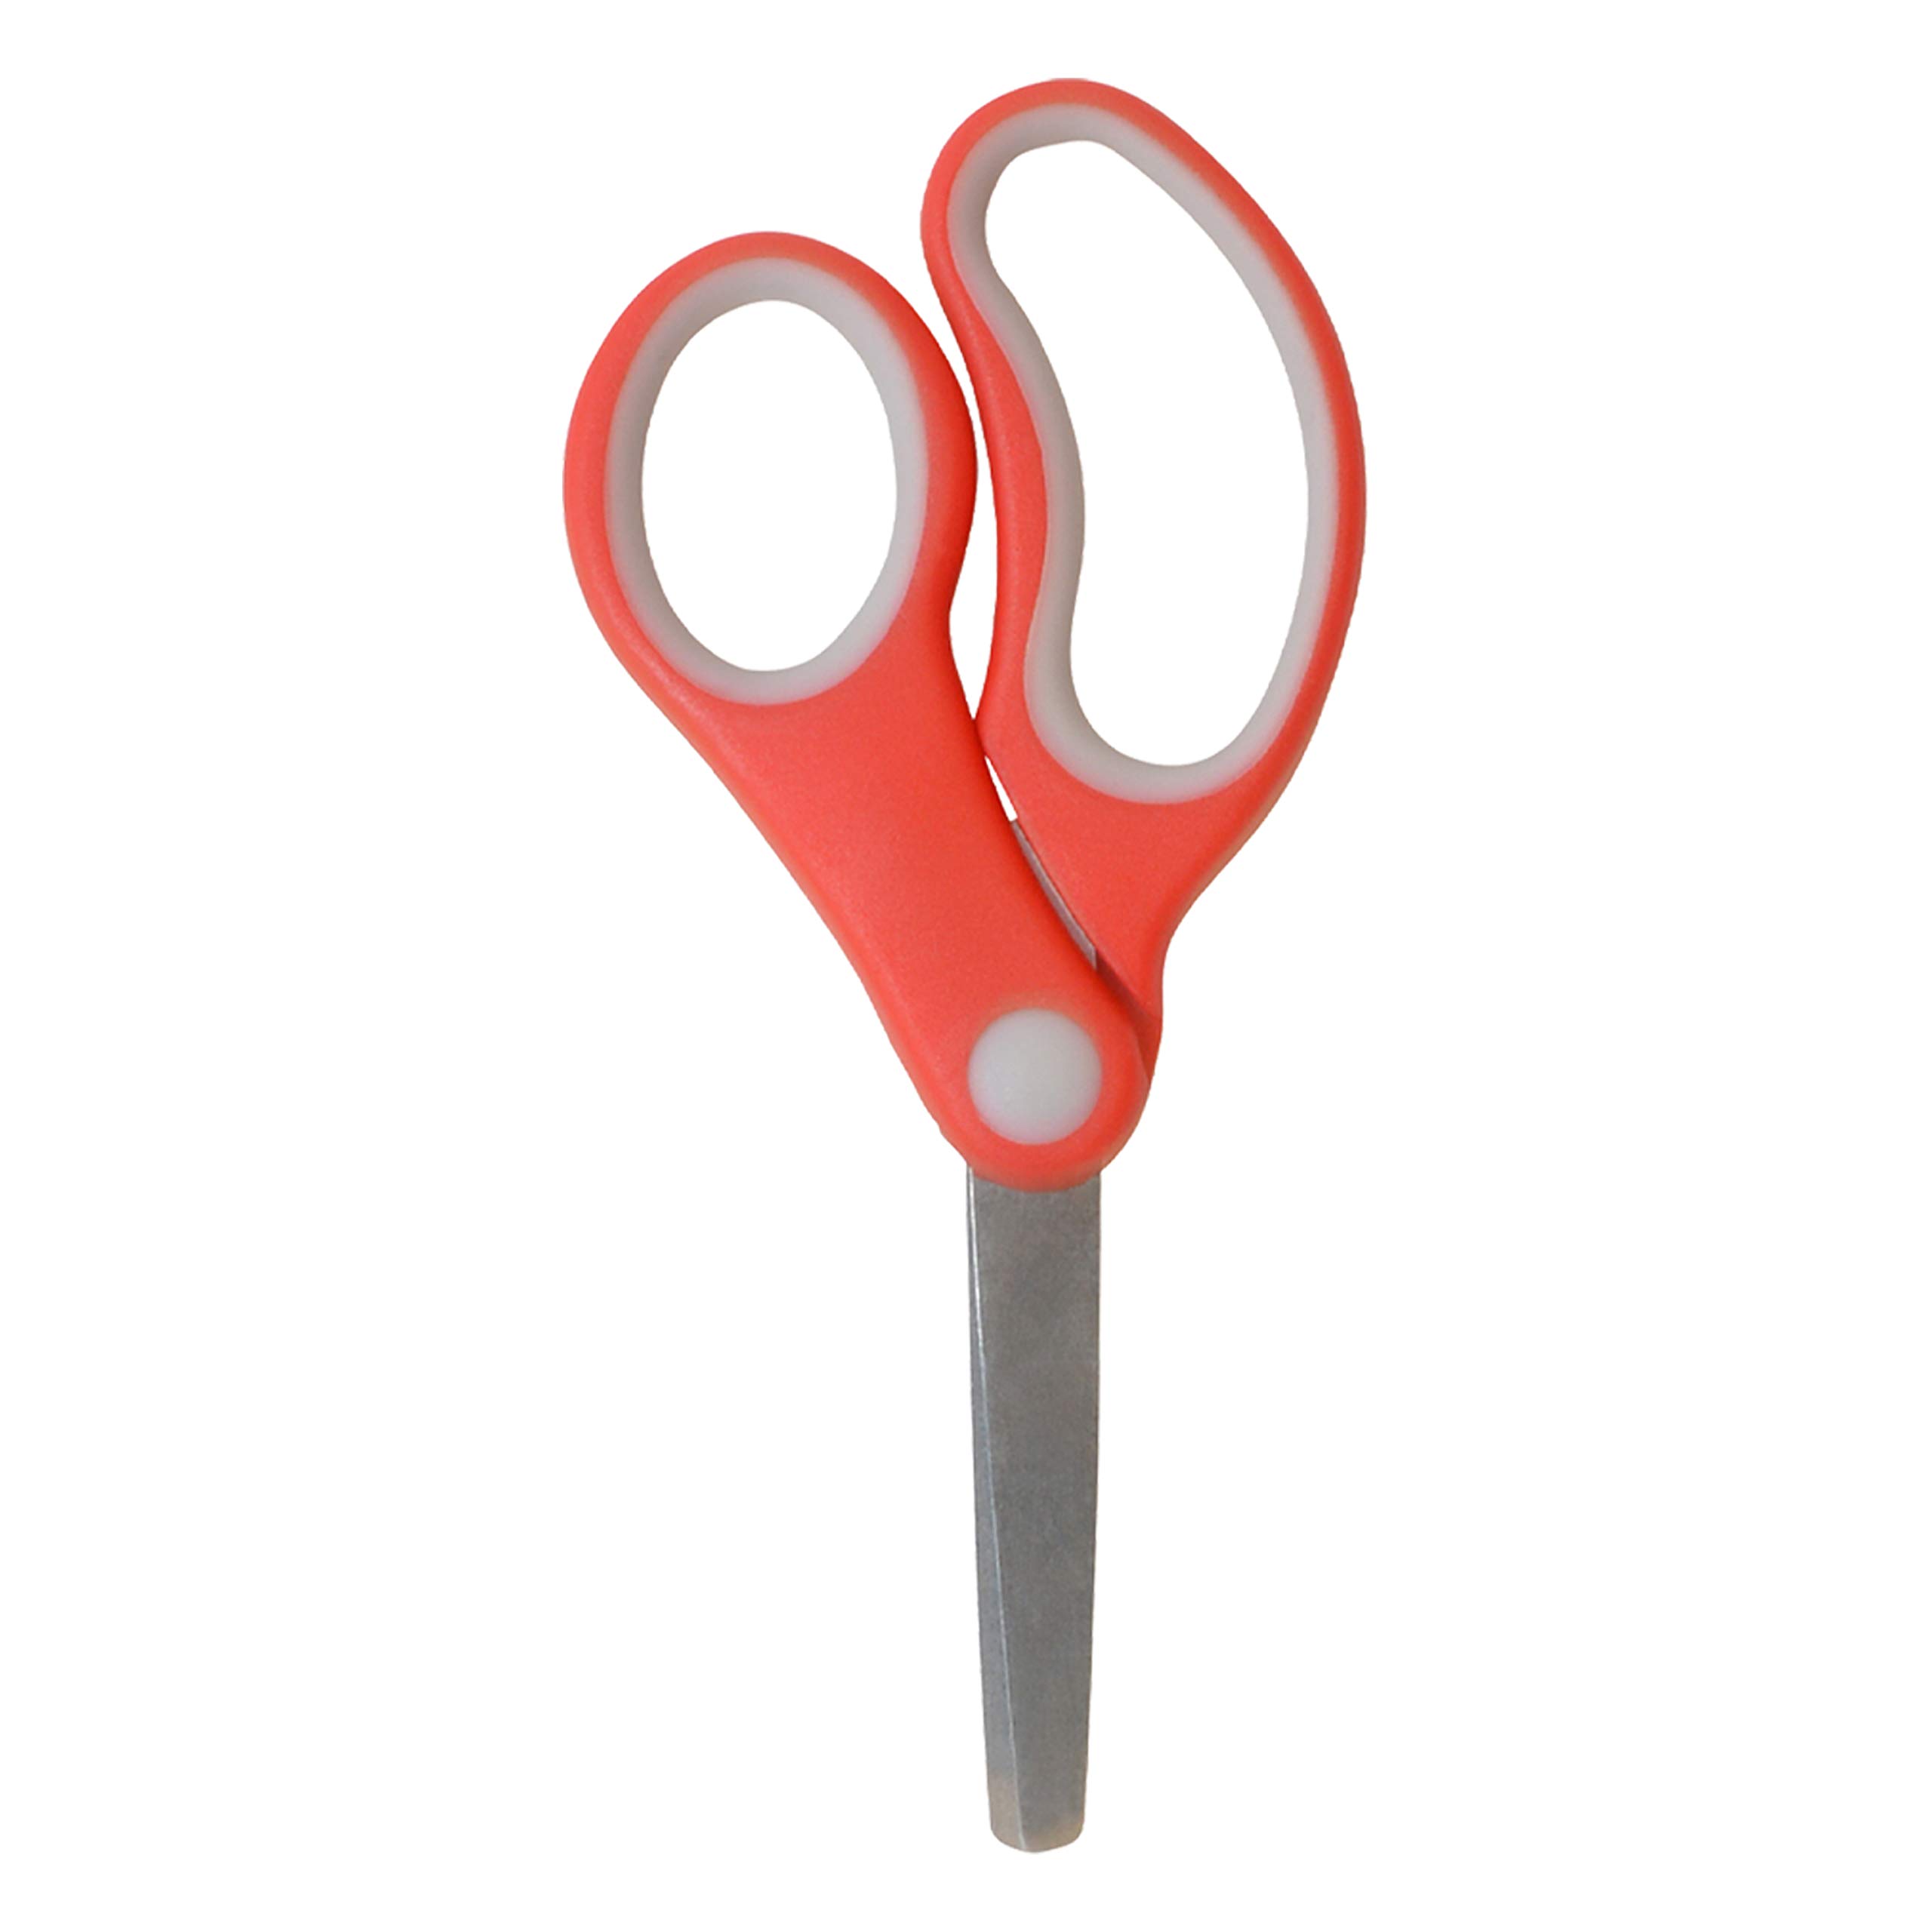 Westcott 55843 Right- and Left-Handed Scissors, Kids' Scissors, Ages 4-8, 5-Inch Blunt Tip, 3 Pack